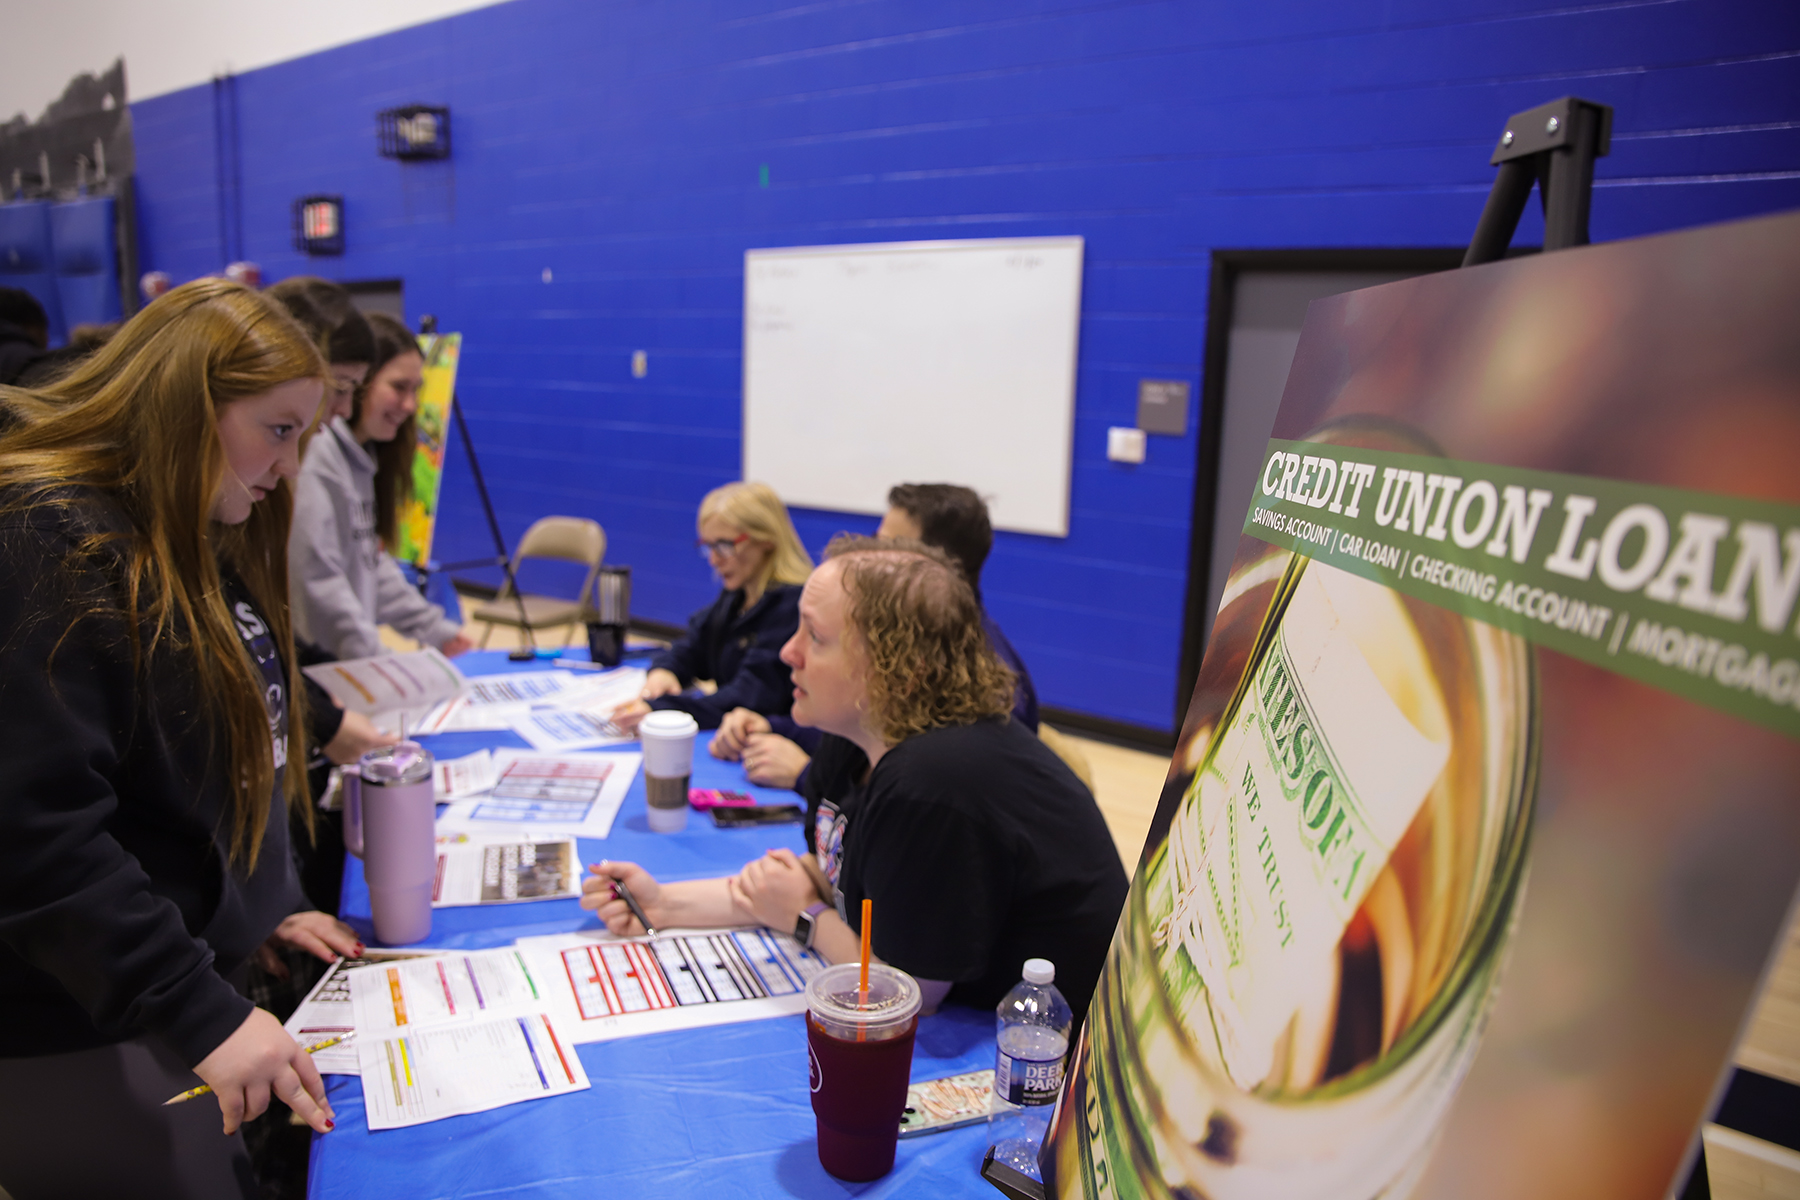 Students meet with volunteers to discuss credit union loans during MaST Community Charter School's Reality Fair.